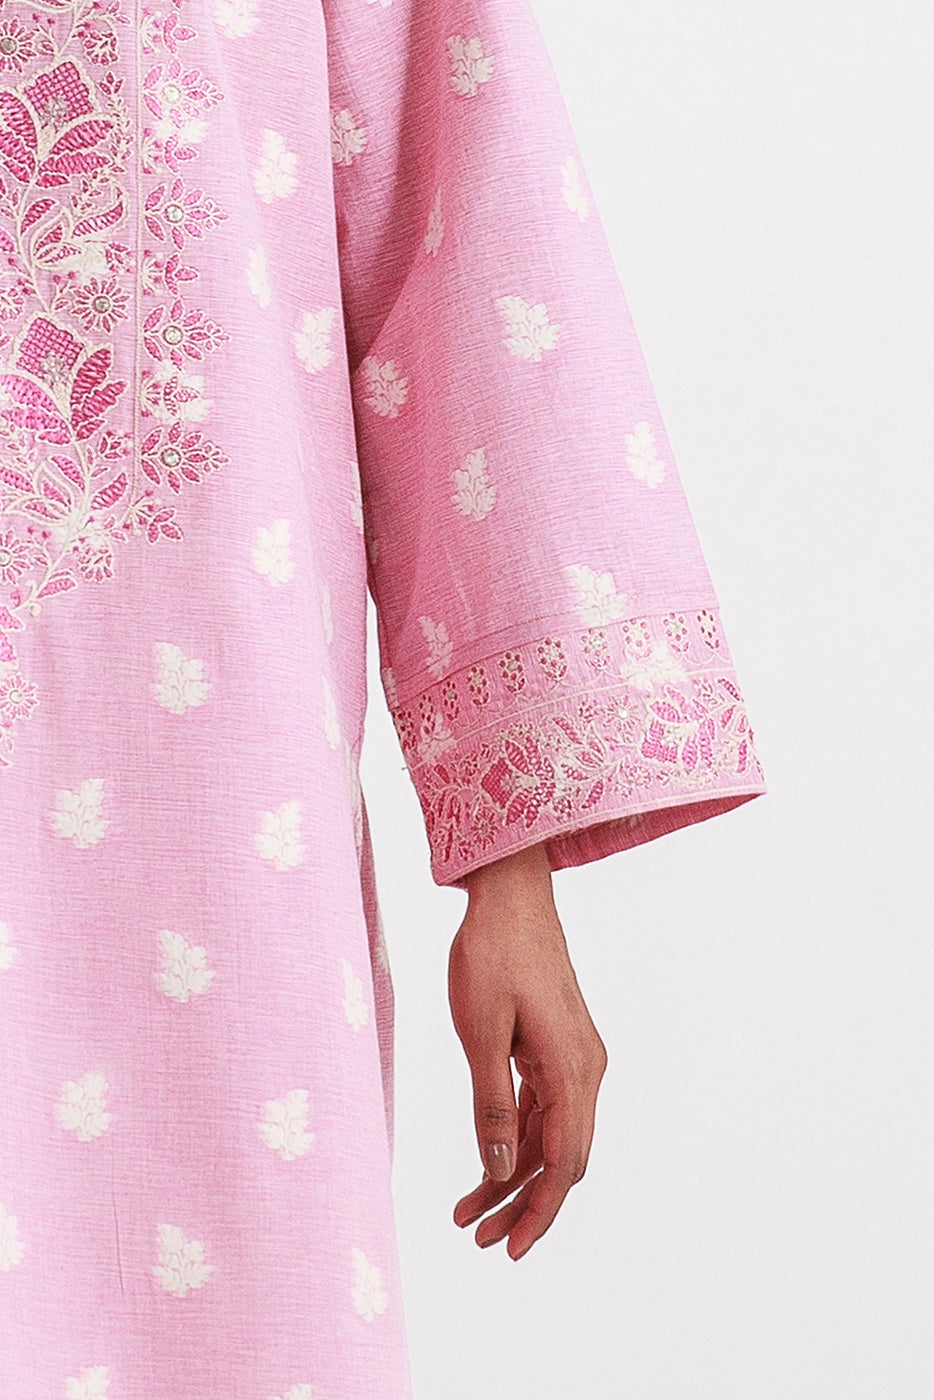 2 PIECE EMBROIDERED TWO TONE JACQUARD SUIT-ROSY PINK (UNSTITCHED)